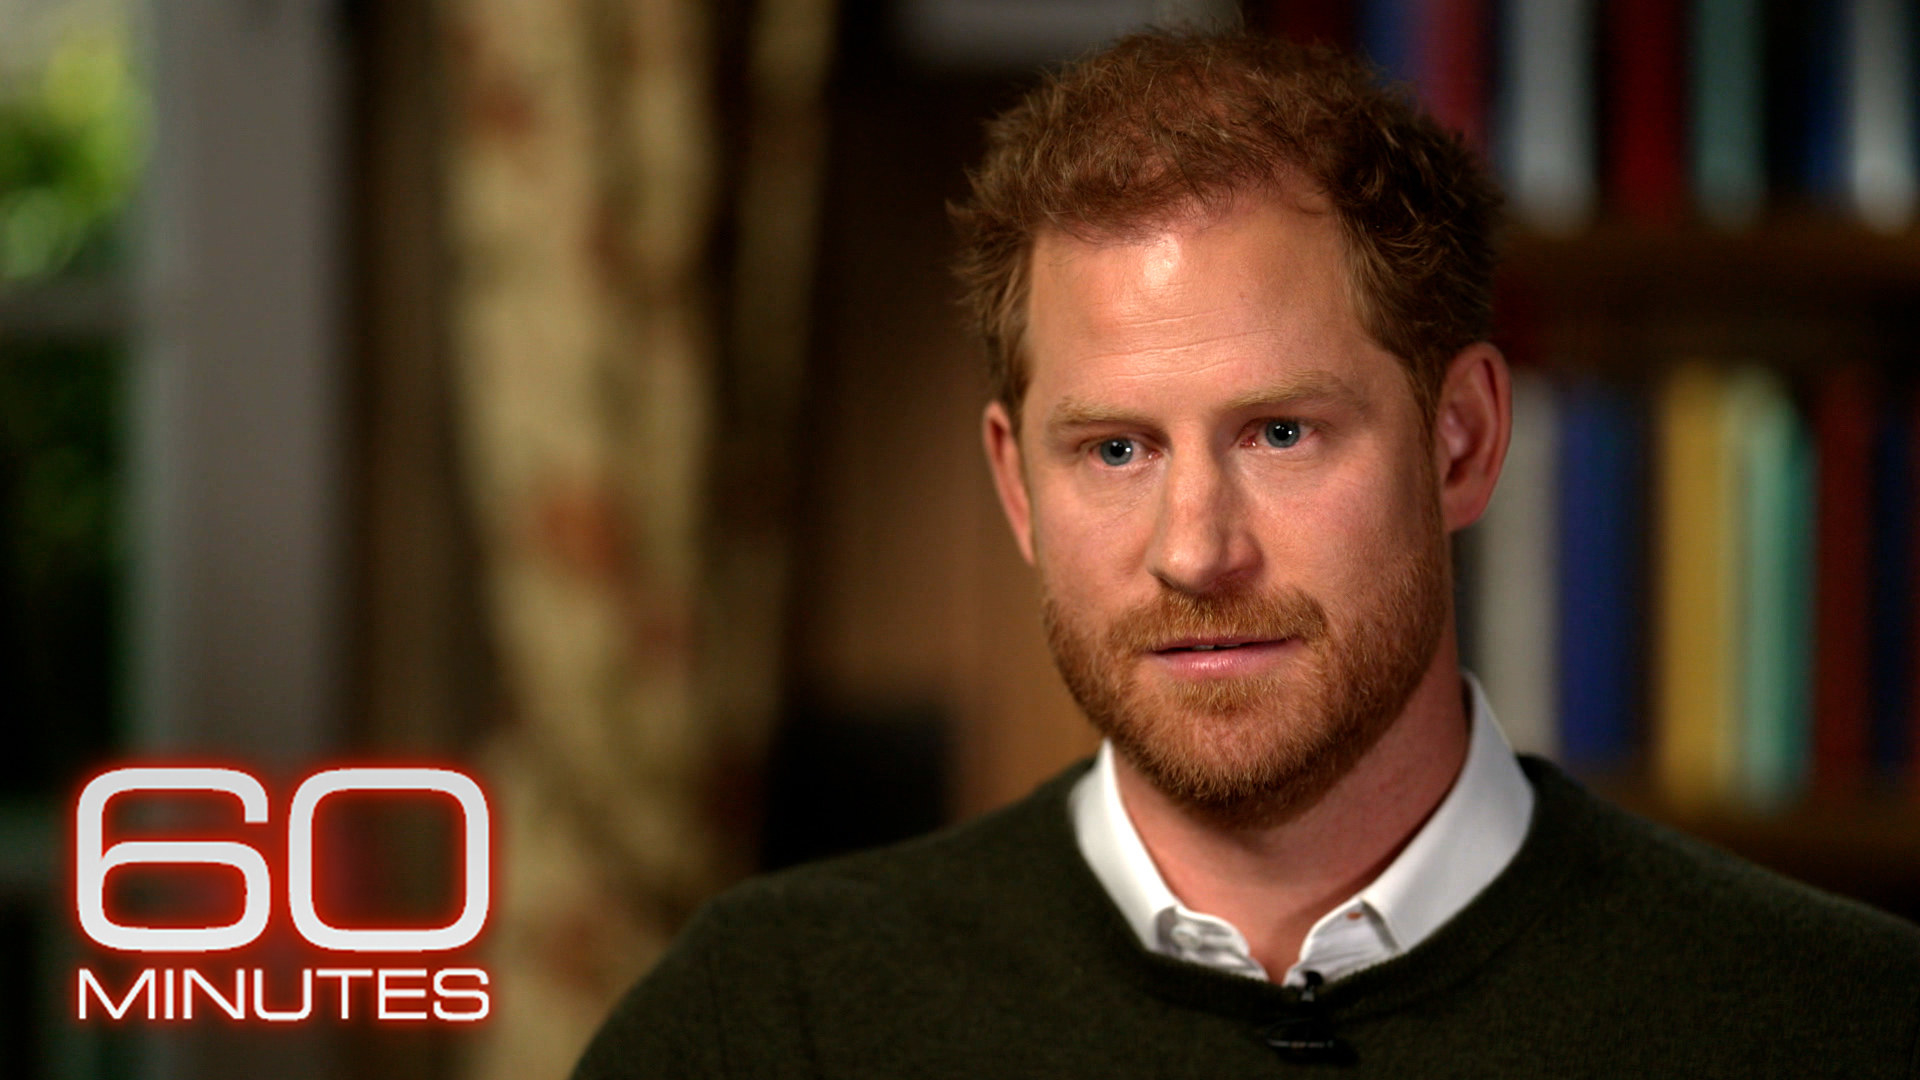 Prince Harry in his 60 Minutes interview with Anderson Cooper